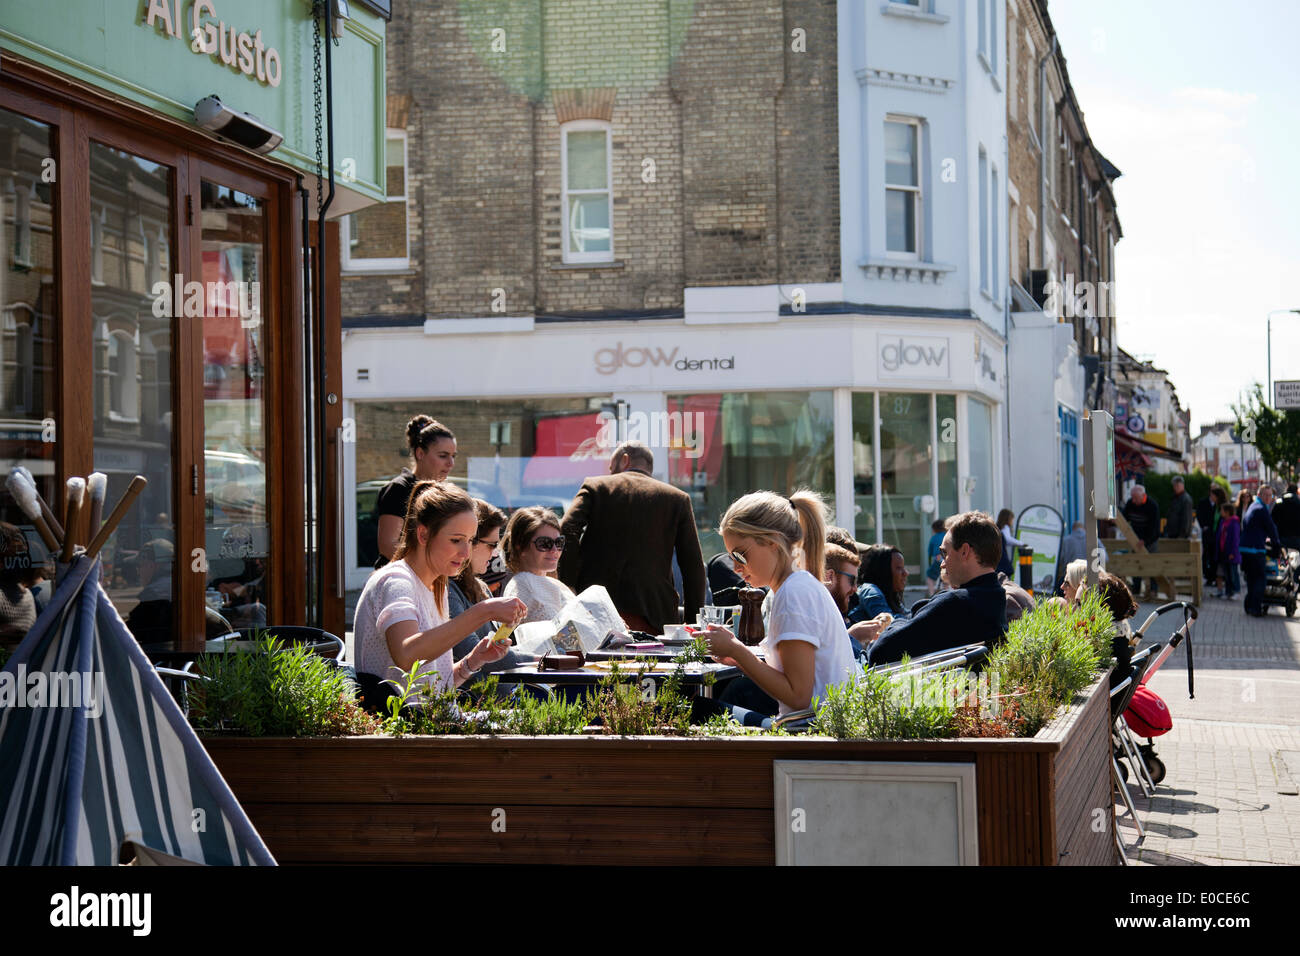 People at café on Northcote Rd SW11 - Battersea - London UK Stock Photo